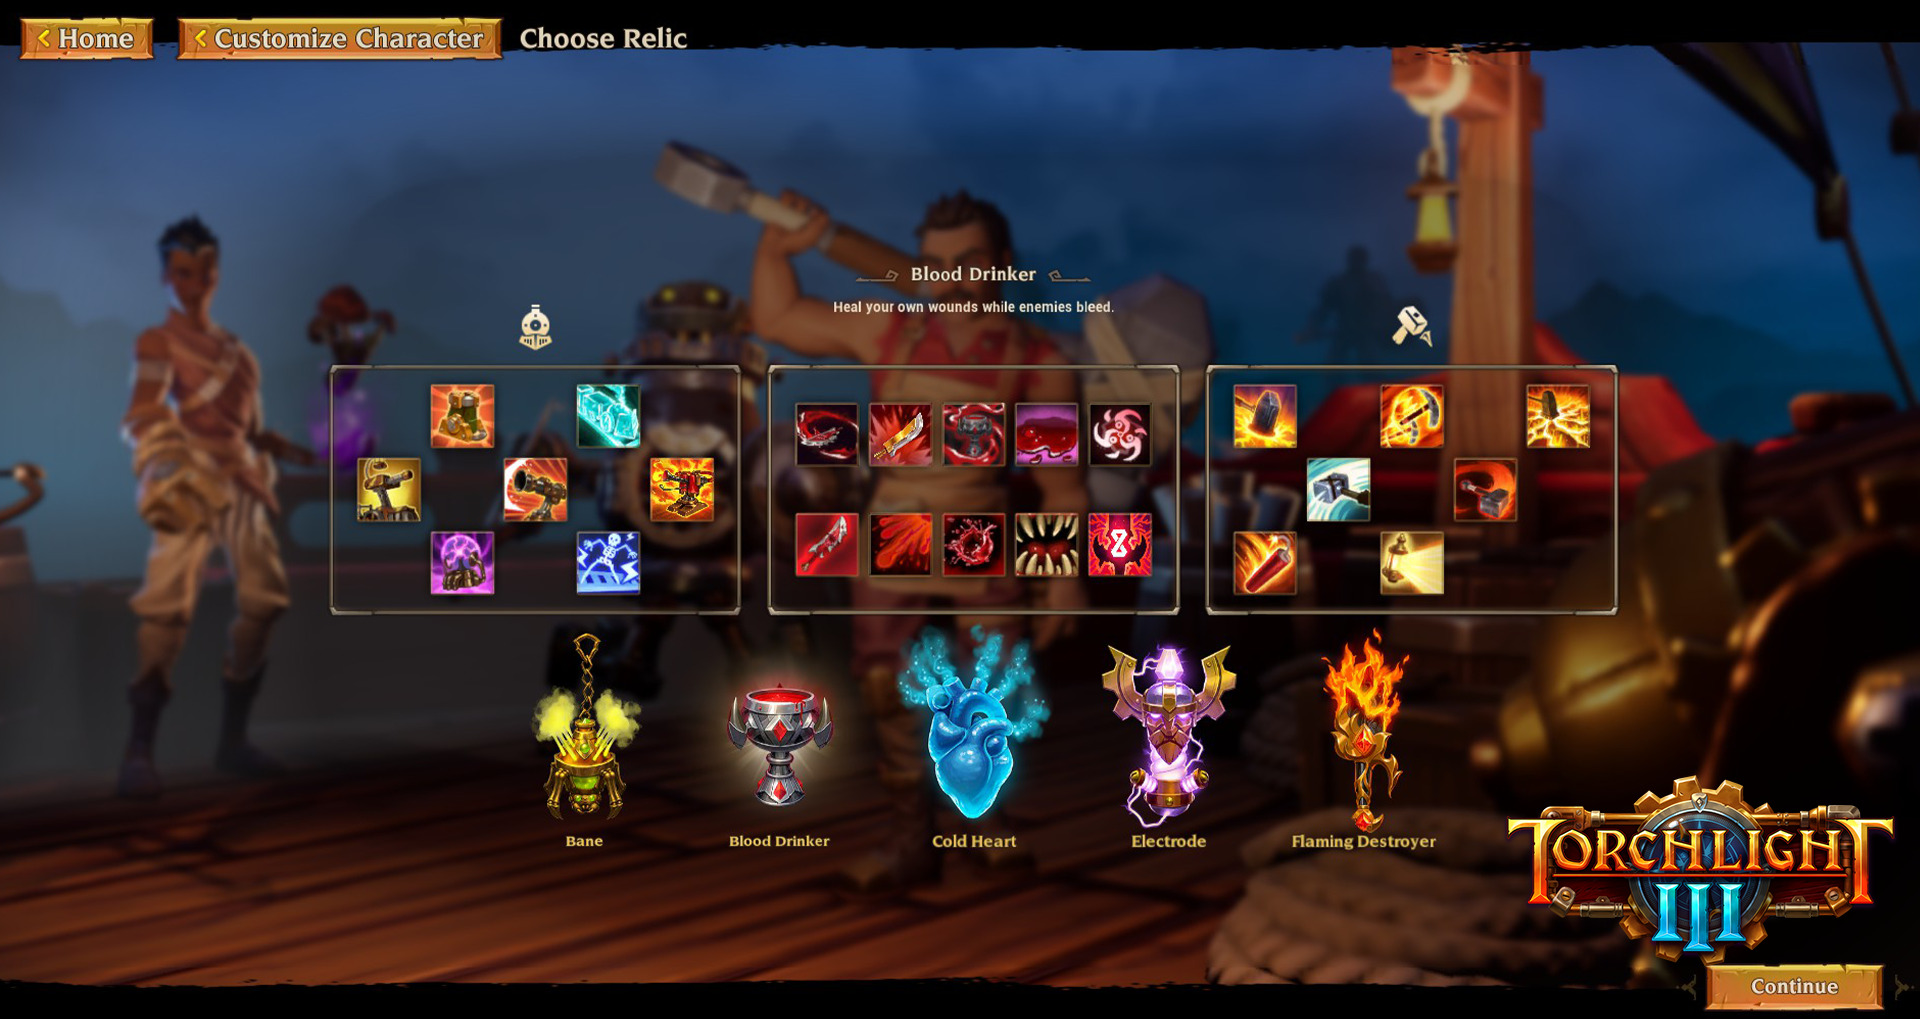 Simple Torchlight 3 Builds Mean Mindless Fun With Friends Siliconera